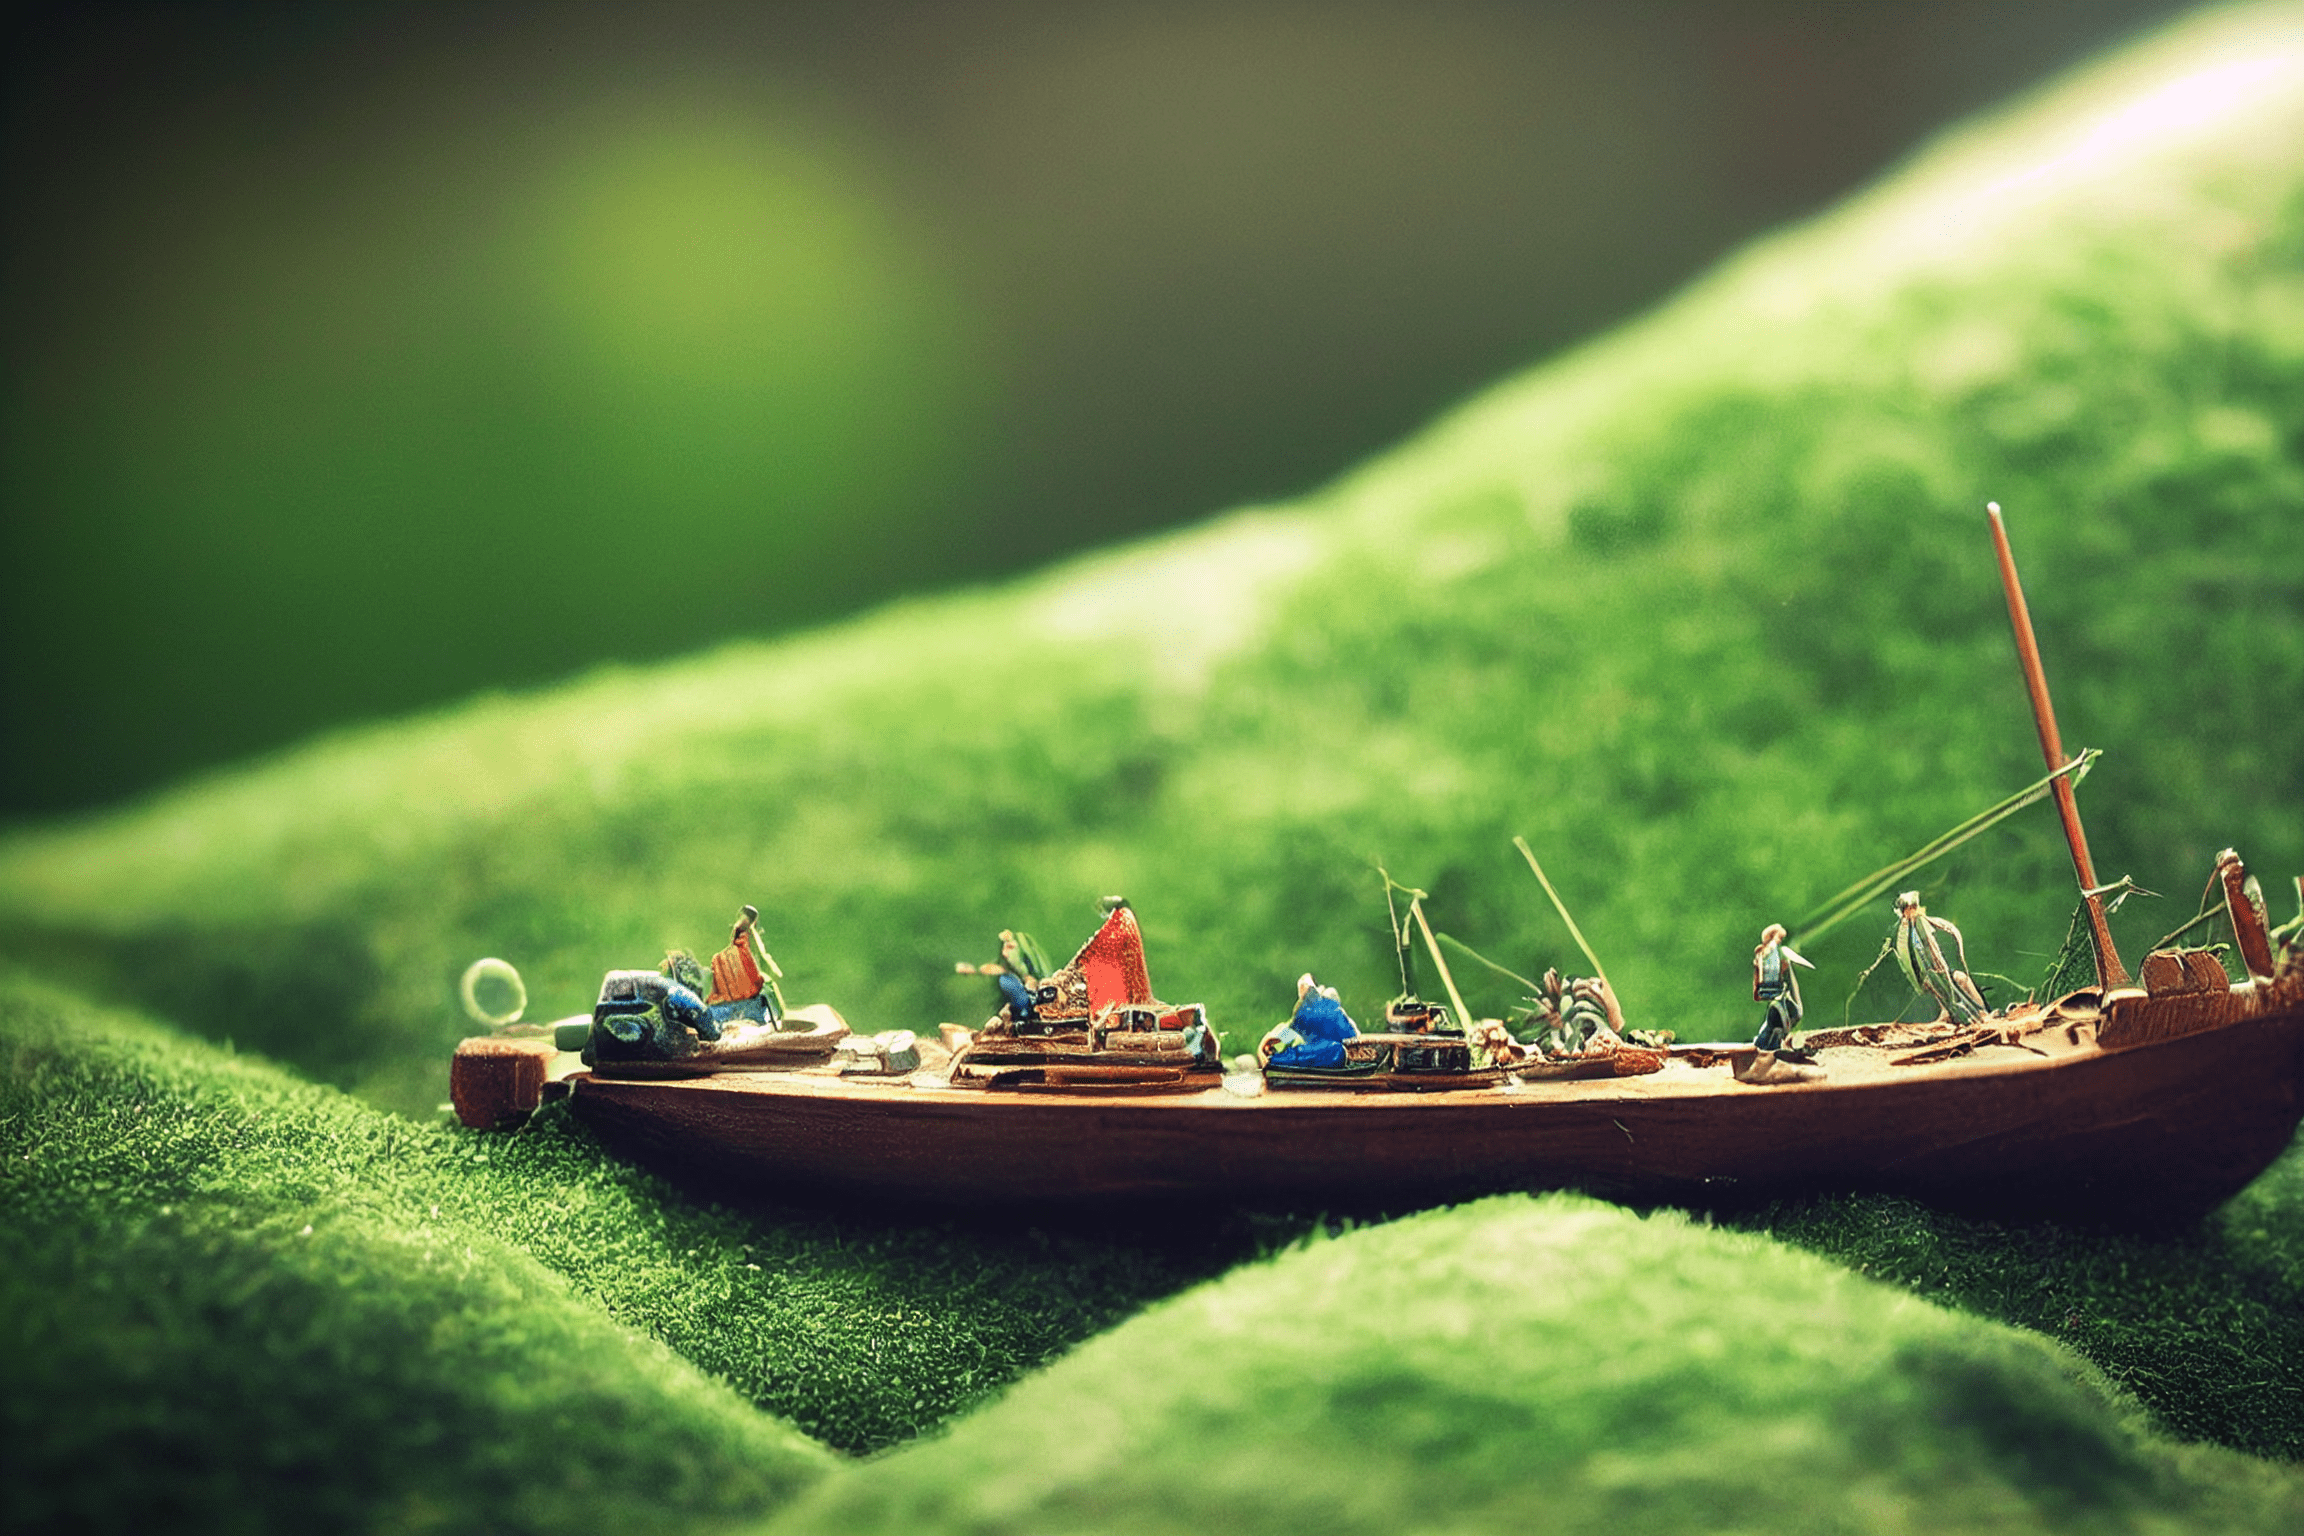 Way back a year ago – Cabincore miniature boat on a green sea